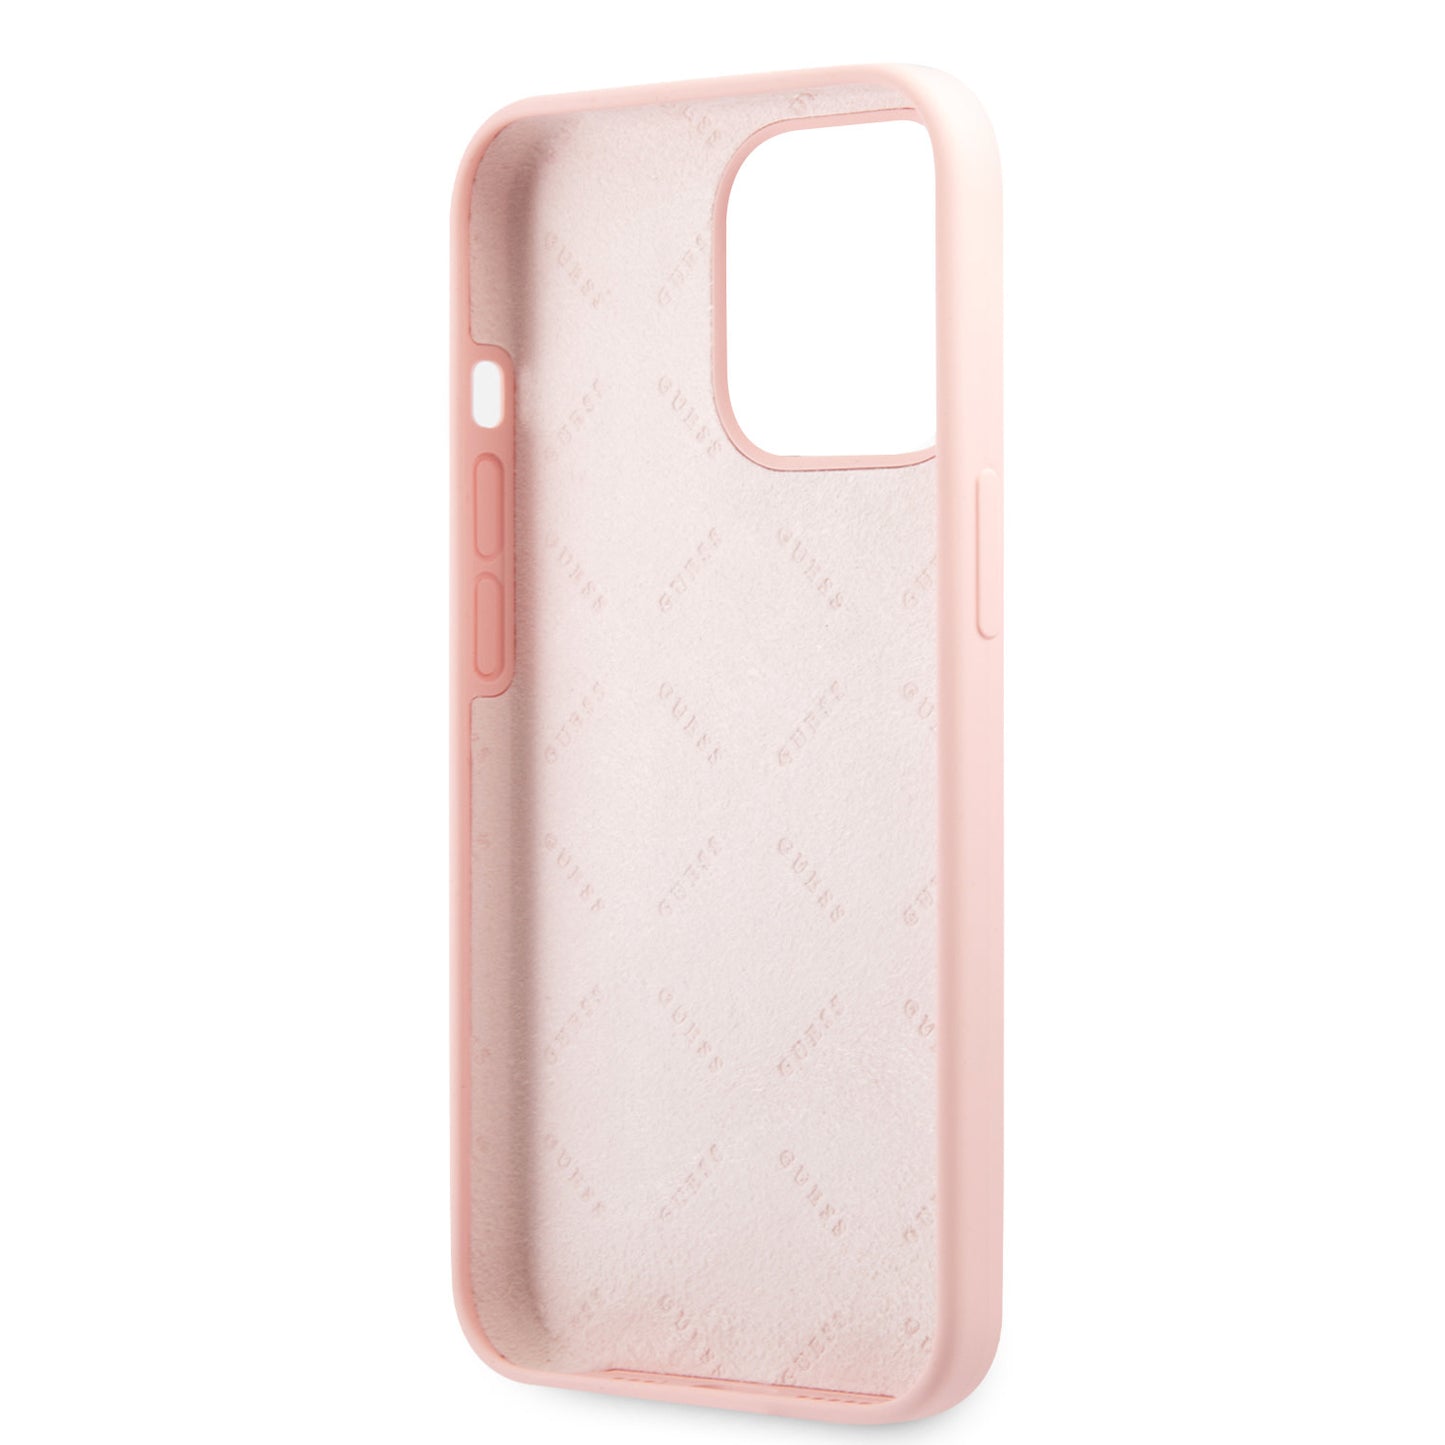 Guess iPhone 13 PRO Backcover - Wit 4G Logo - Mat Roze